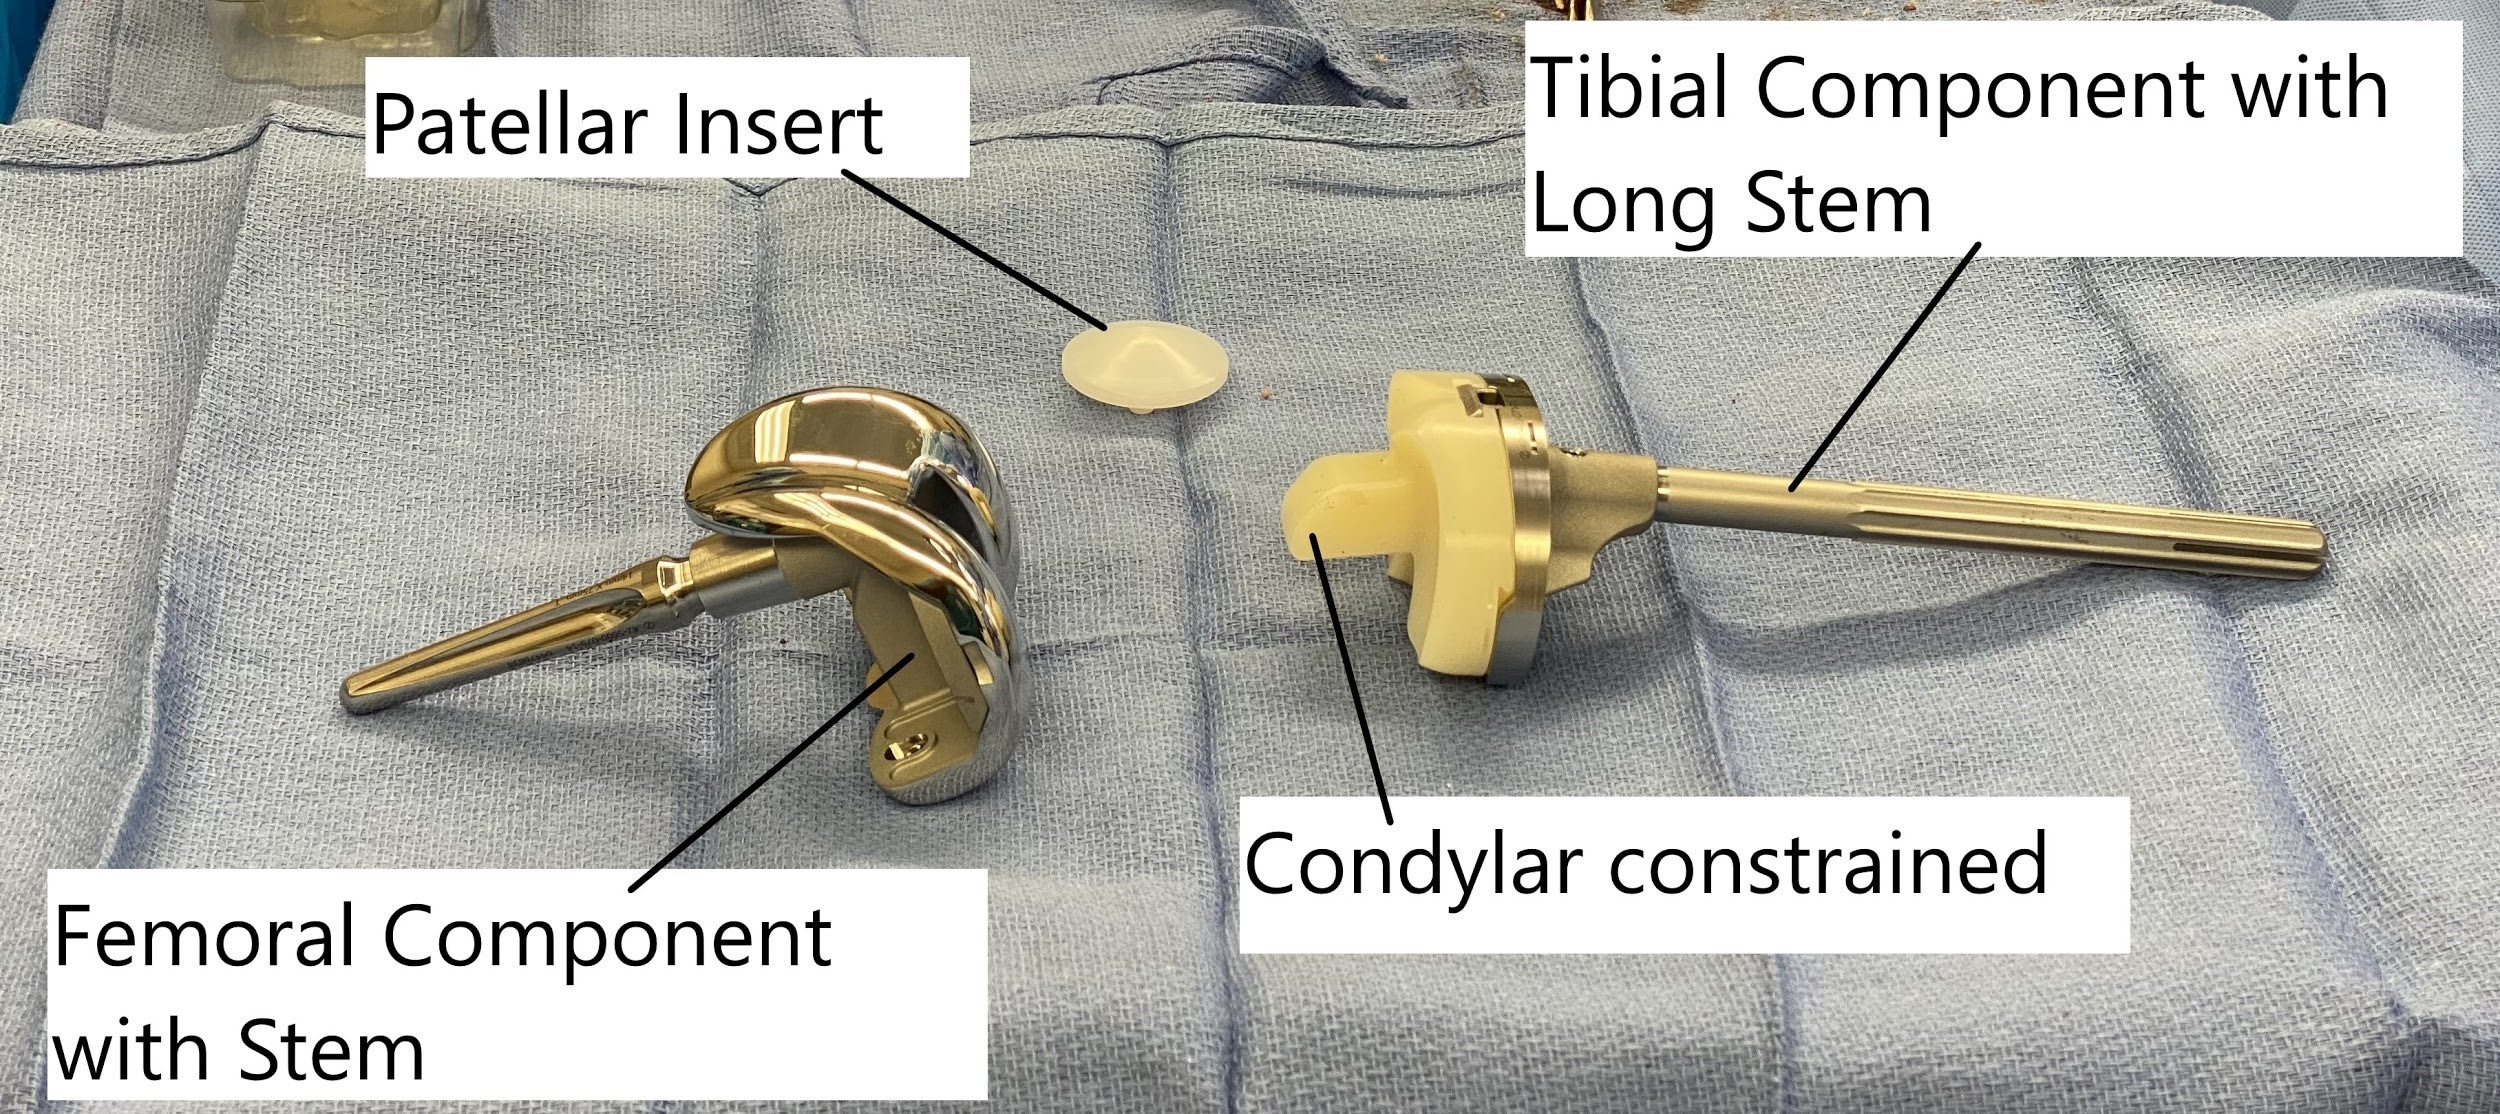 Revision knee replacement implants (Condylar constrained)